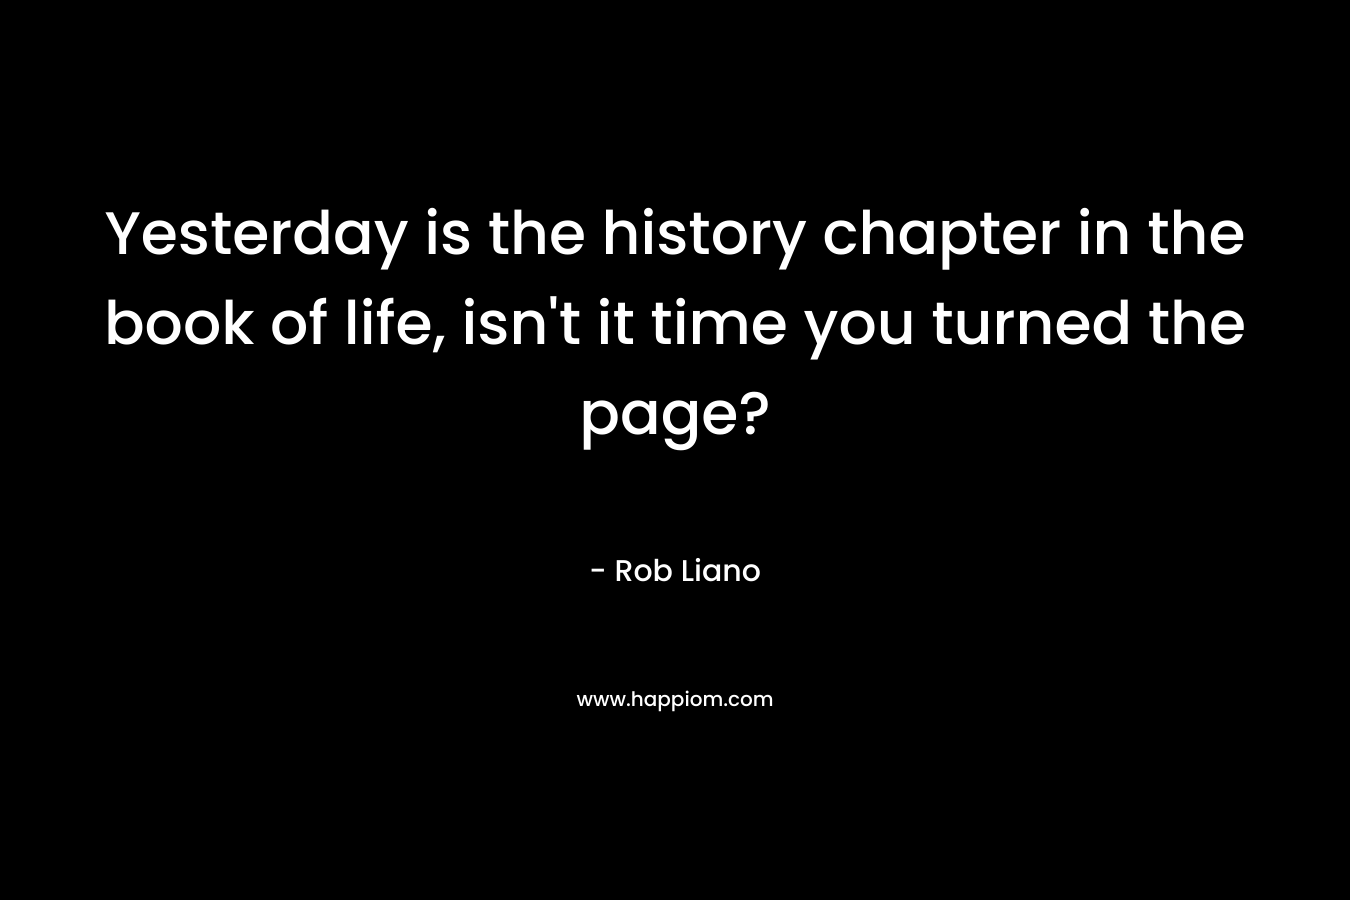 Yesterday is the history chapter in the book of life, isn't it time you turned the page?